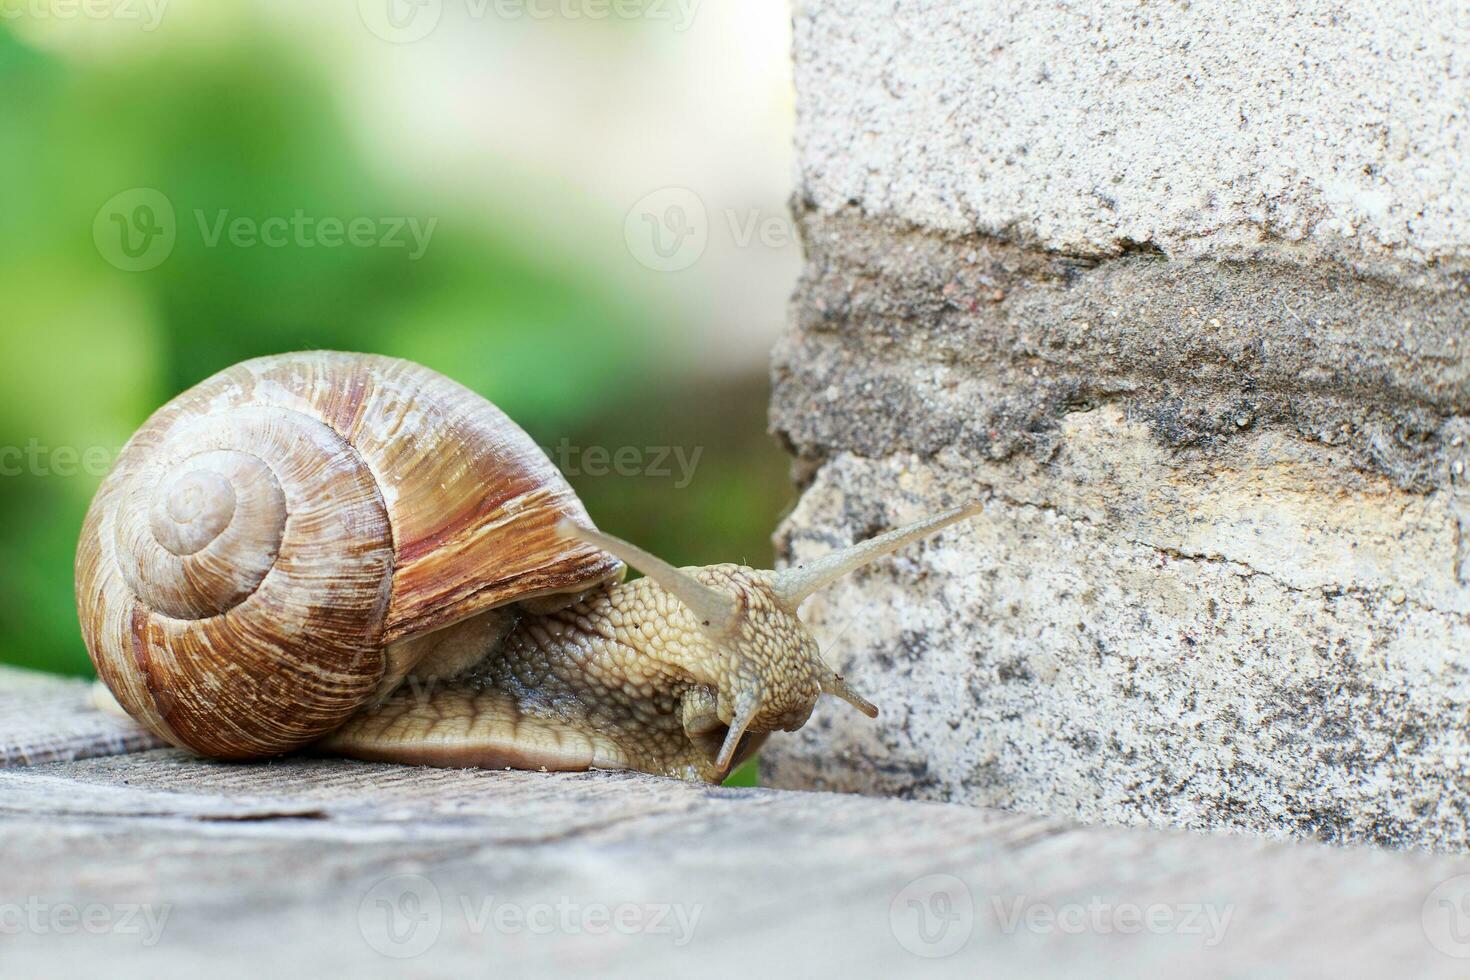 the snail is climbing the wall in the garden photo